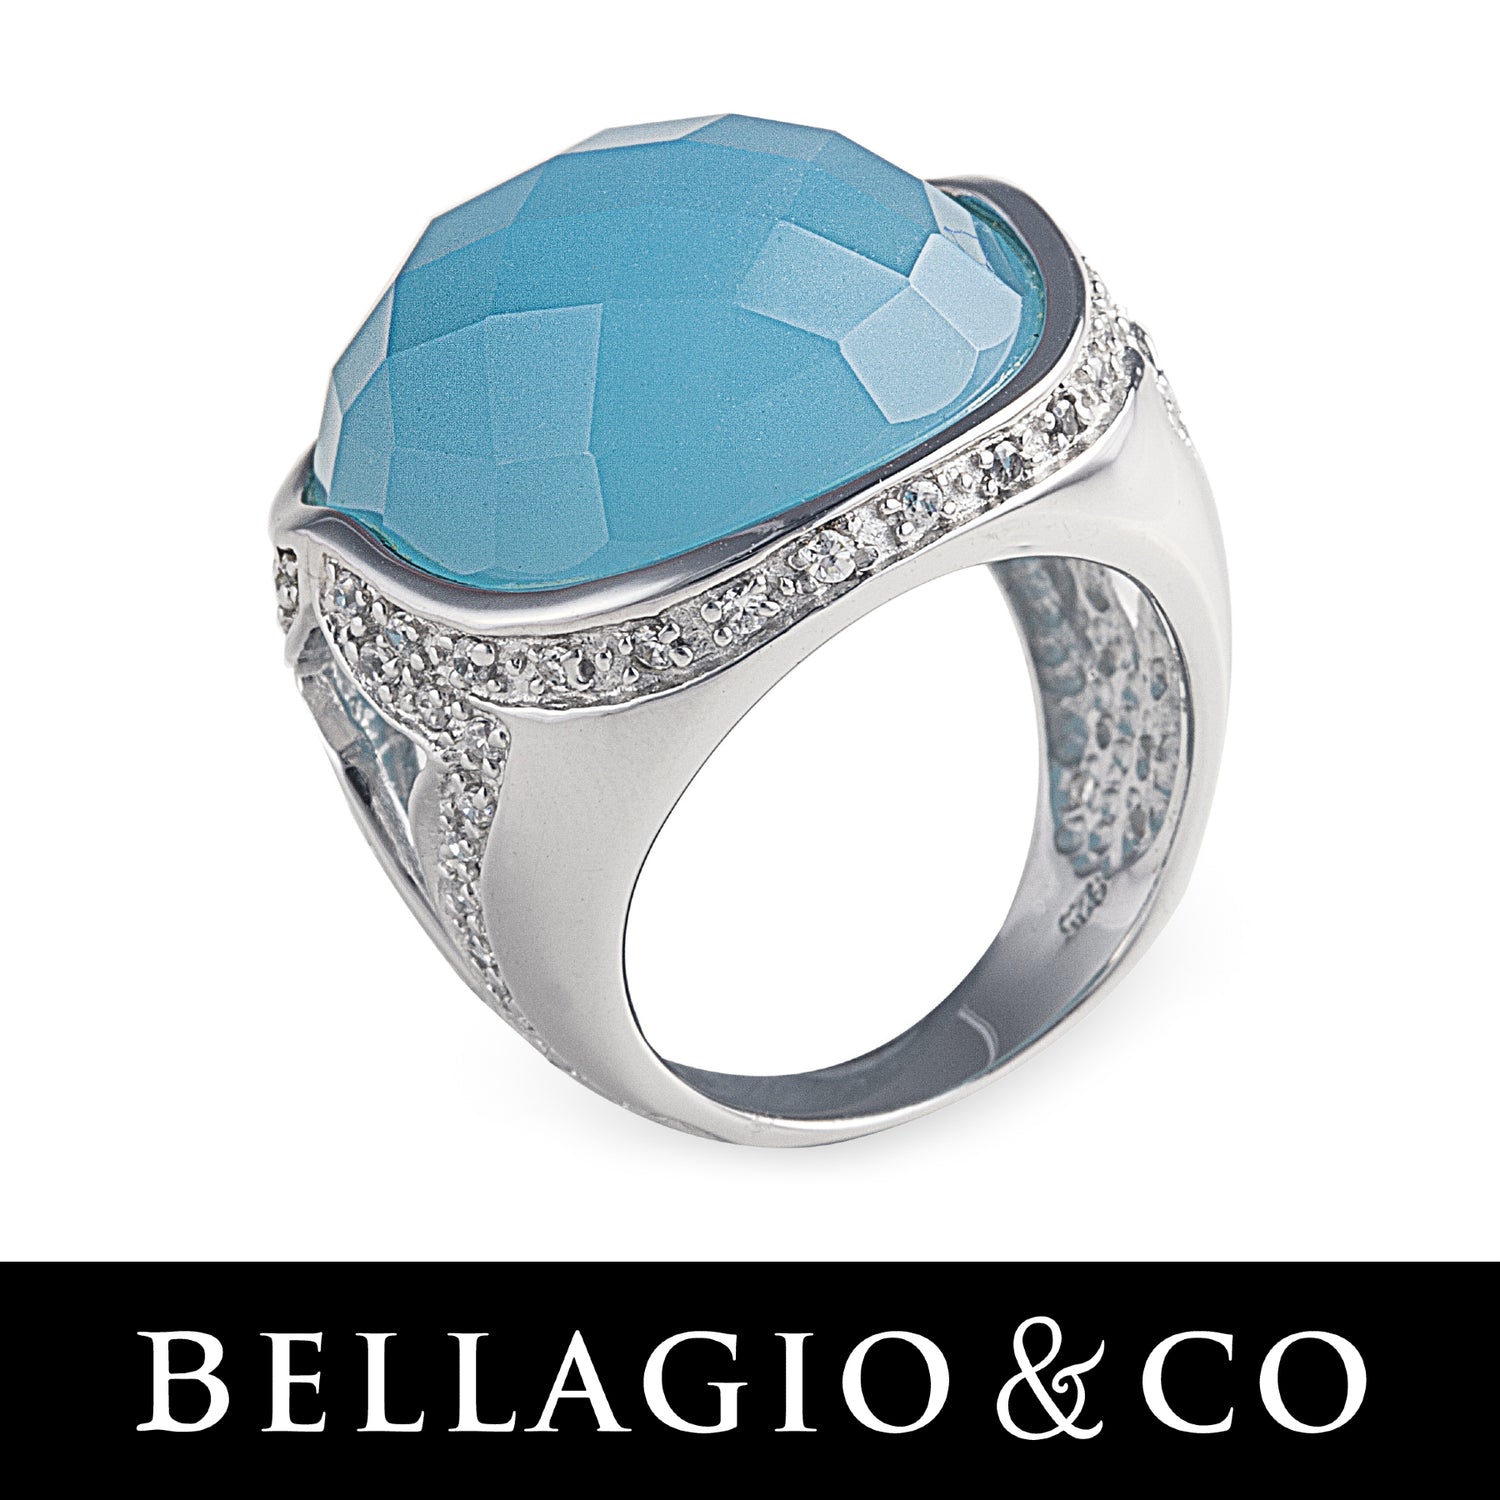 Shop beautiful Bellagio & Co jewellery with blue coloured stones. Worldwide Shipping plus FREE shipping for orders over $150.00 within Australia.